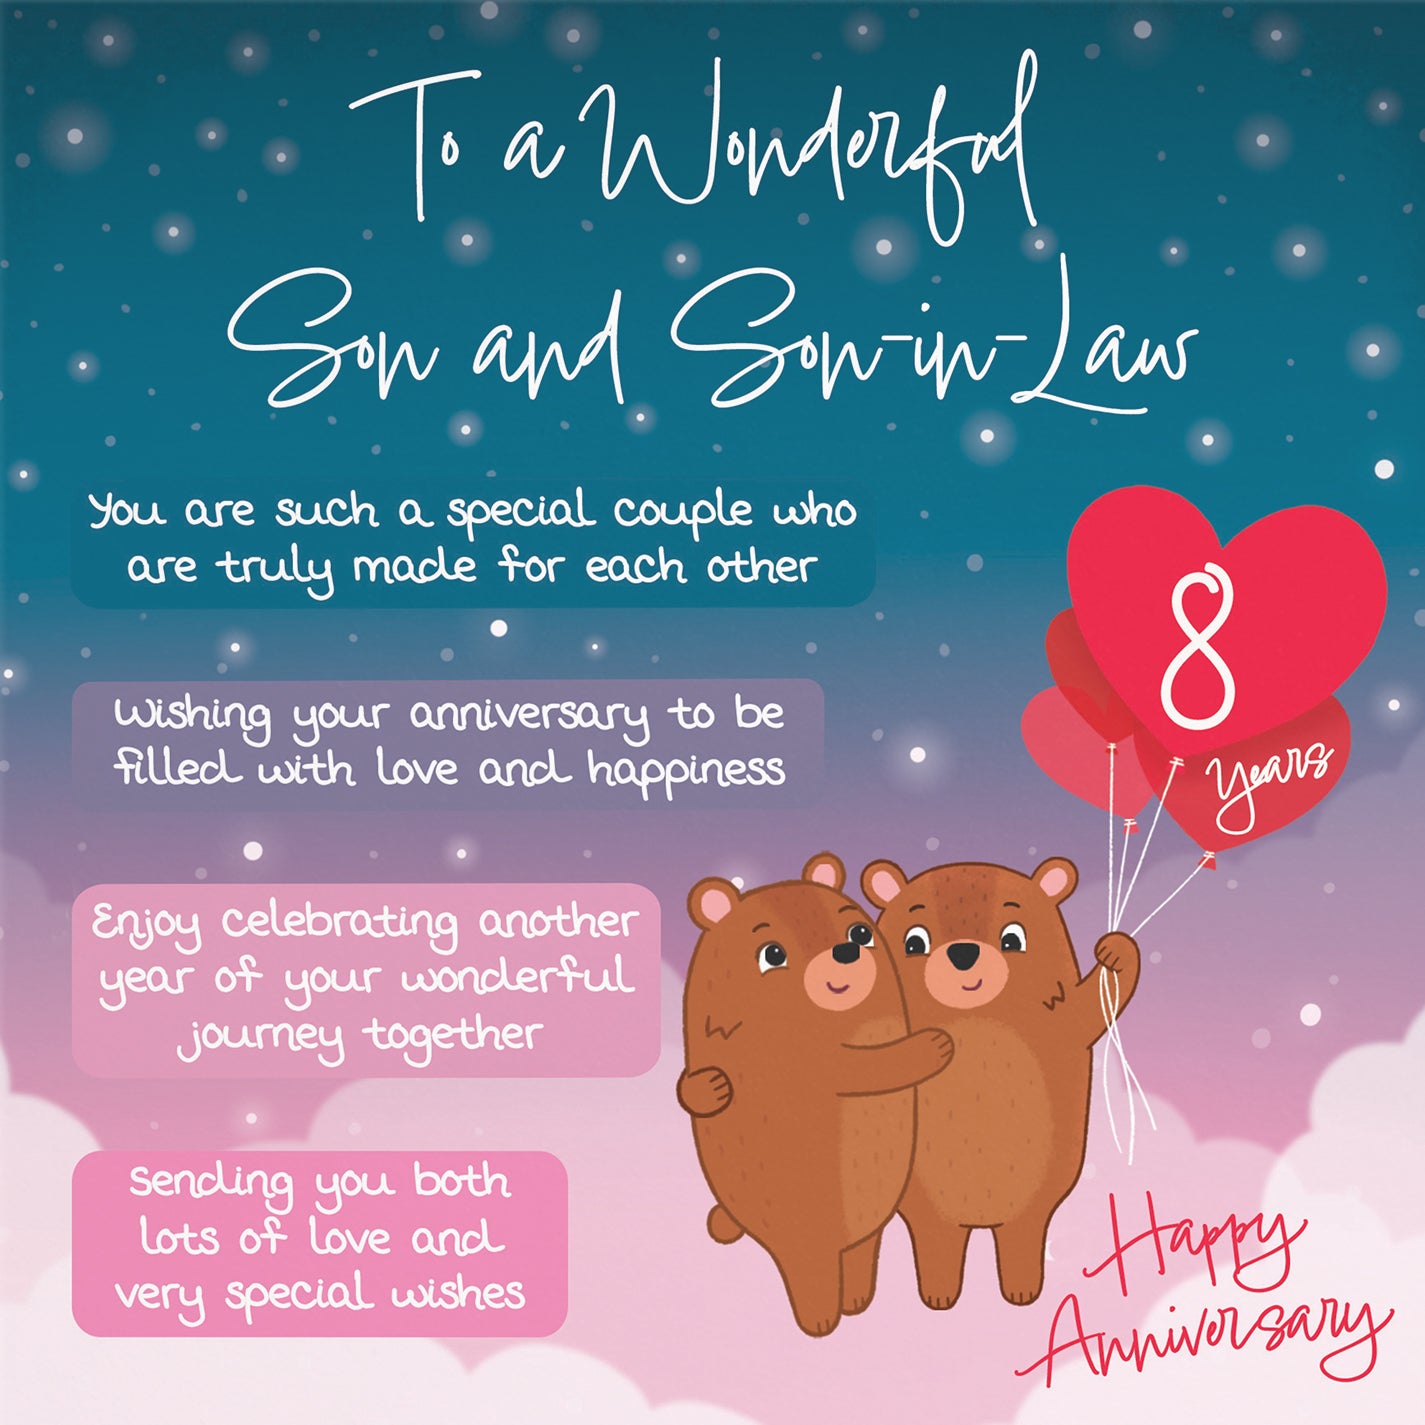 Son And Son In Law 8th Anniversary Card Starry Night Cute Bears